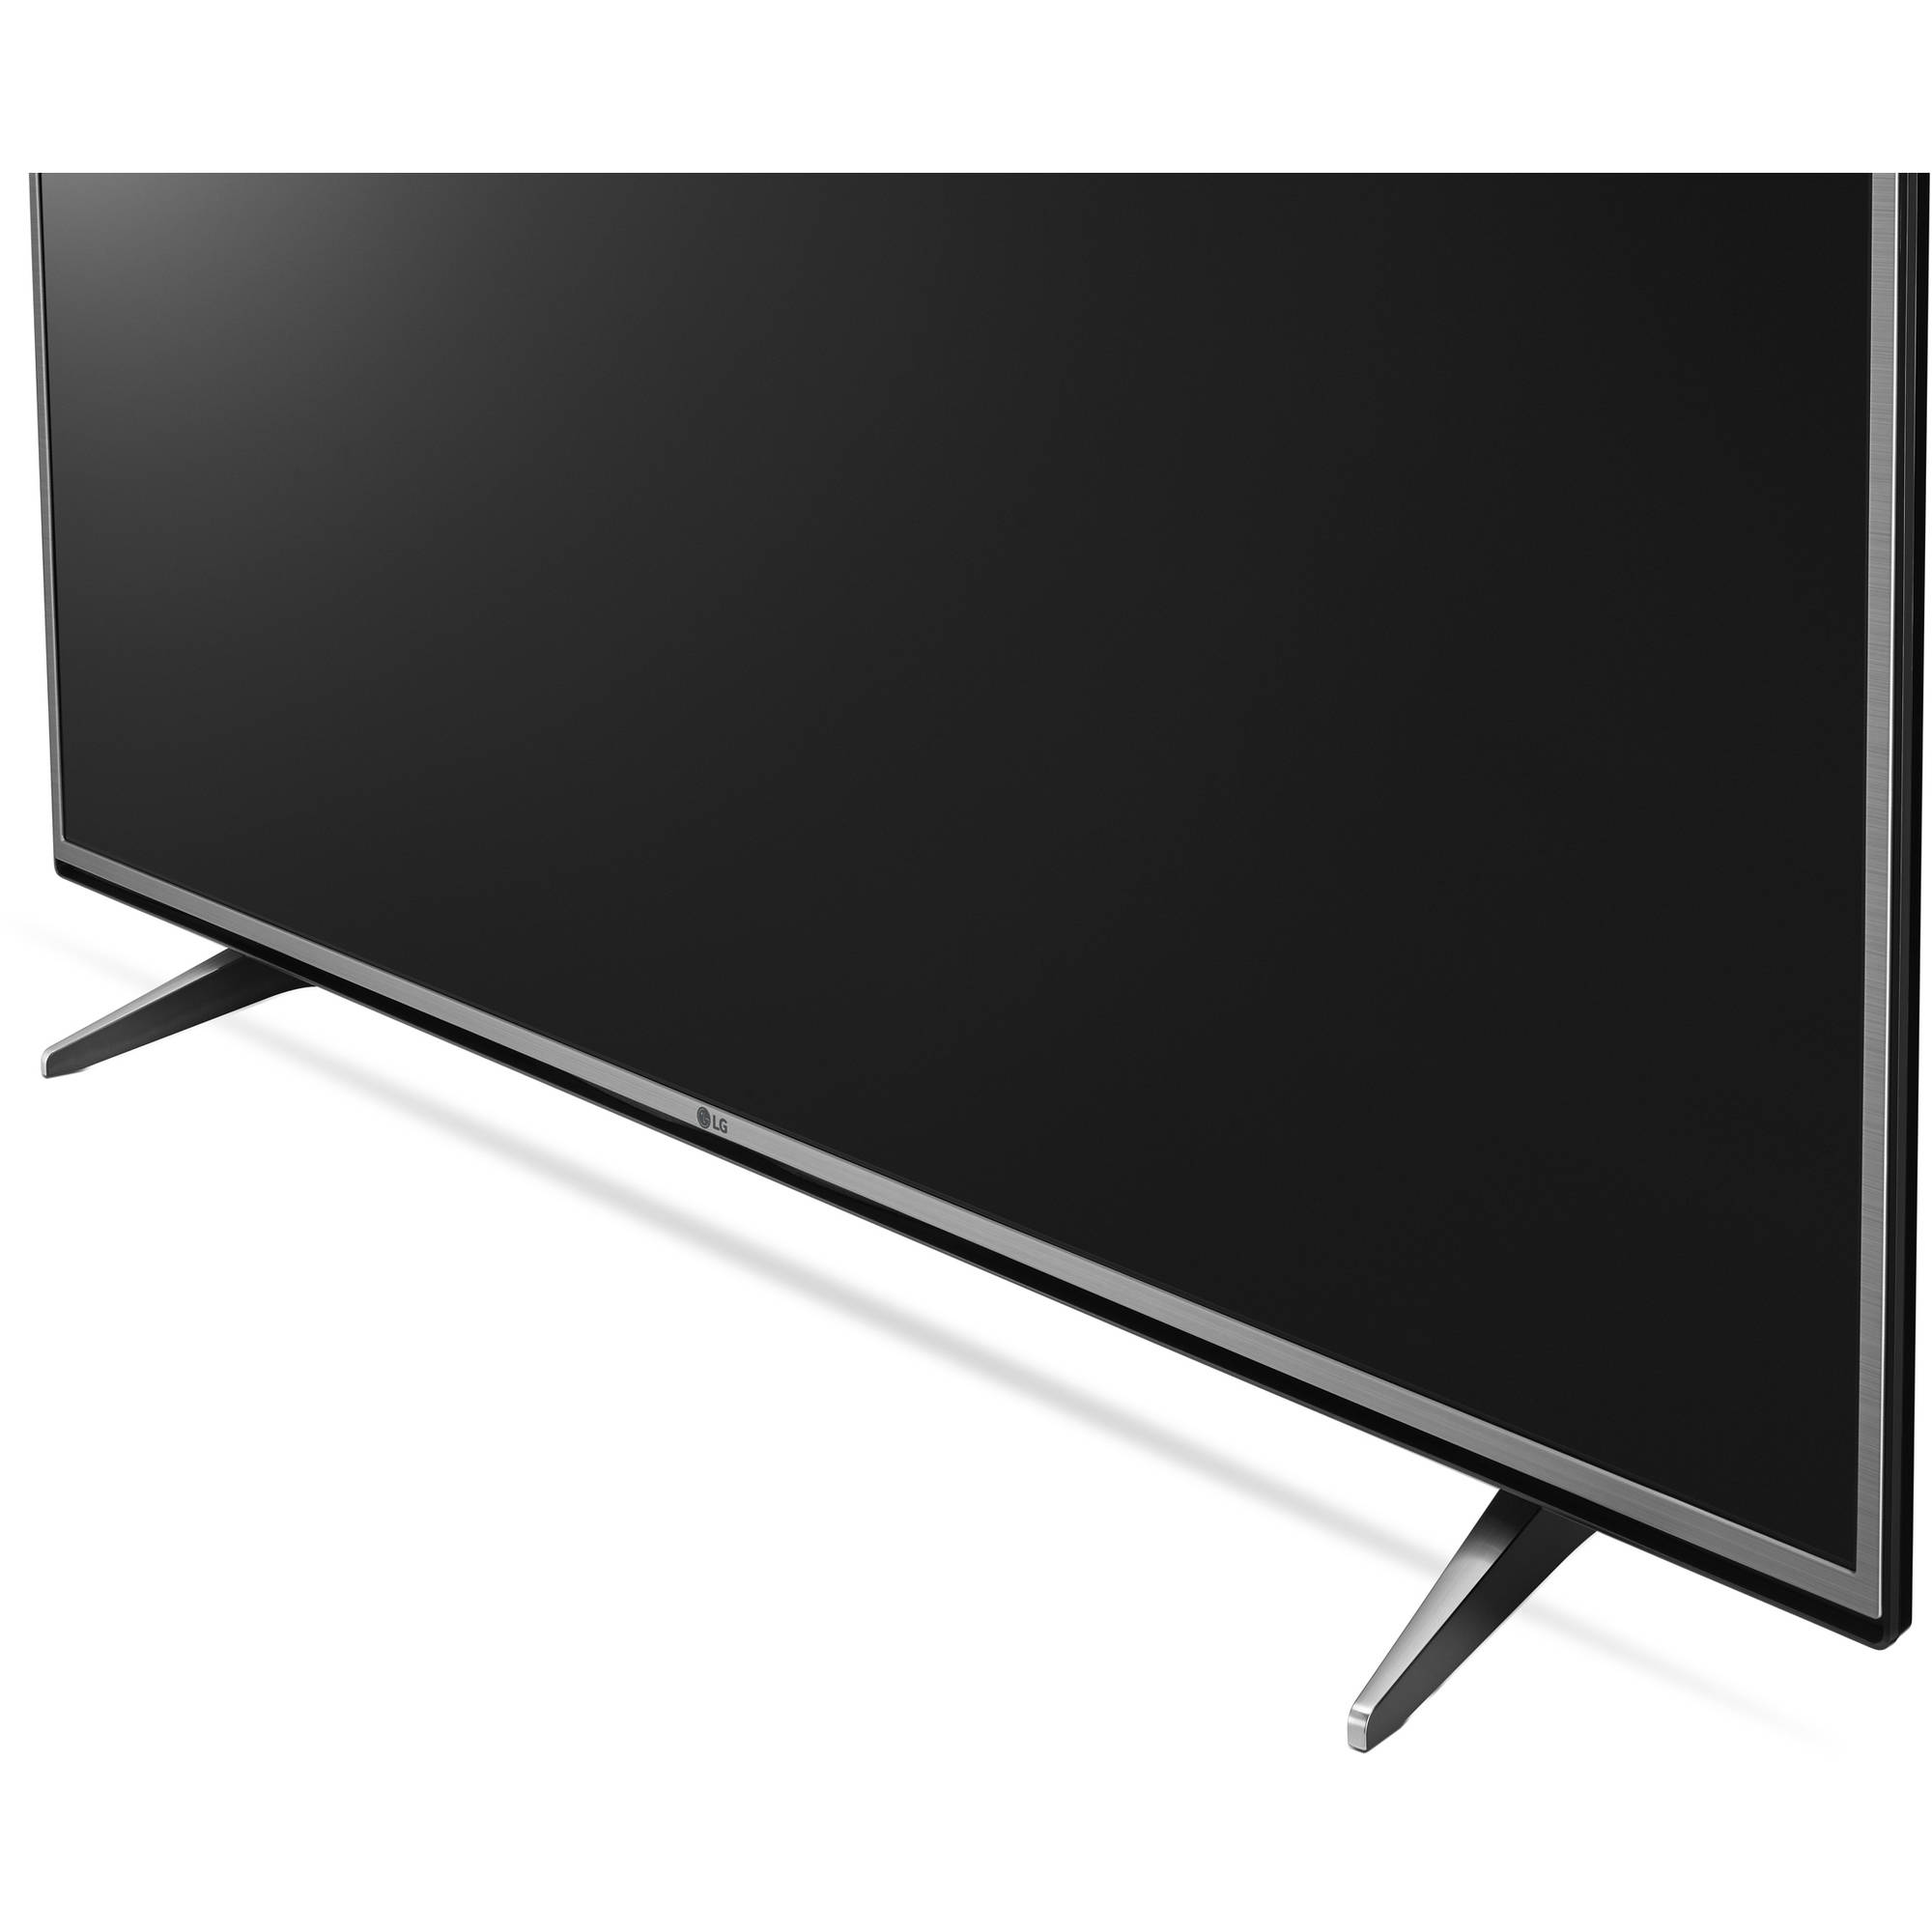 LG 55UH6150 55" 4K Ultra HD 2160p 120Hz LED Smart HDTV (4K x 2K) - image 3 of 9